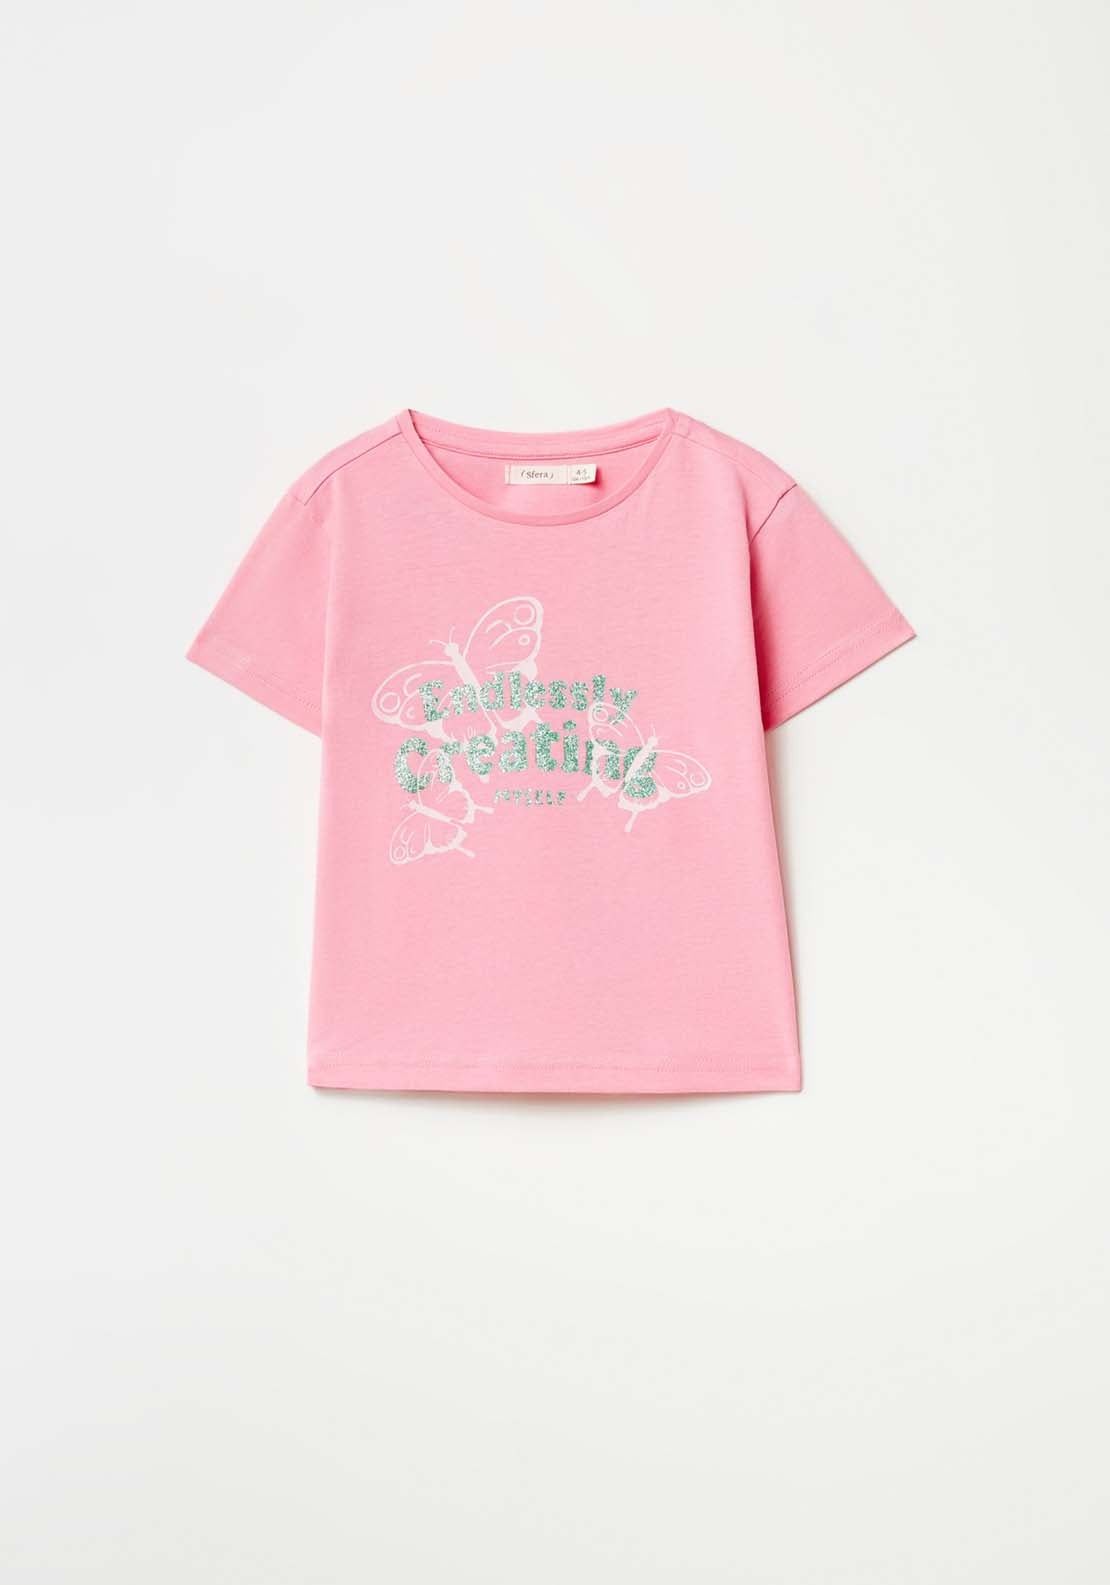 Sfera Butterfly T-Shirt - Pink 1 Shaws Department Stores